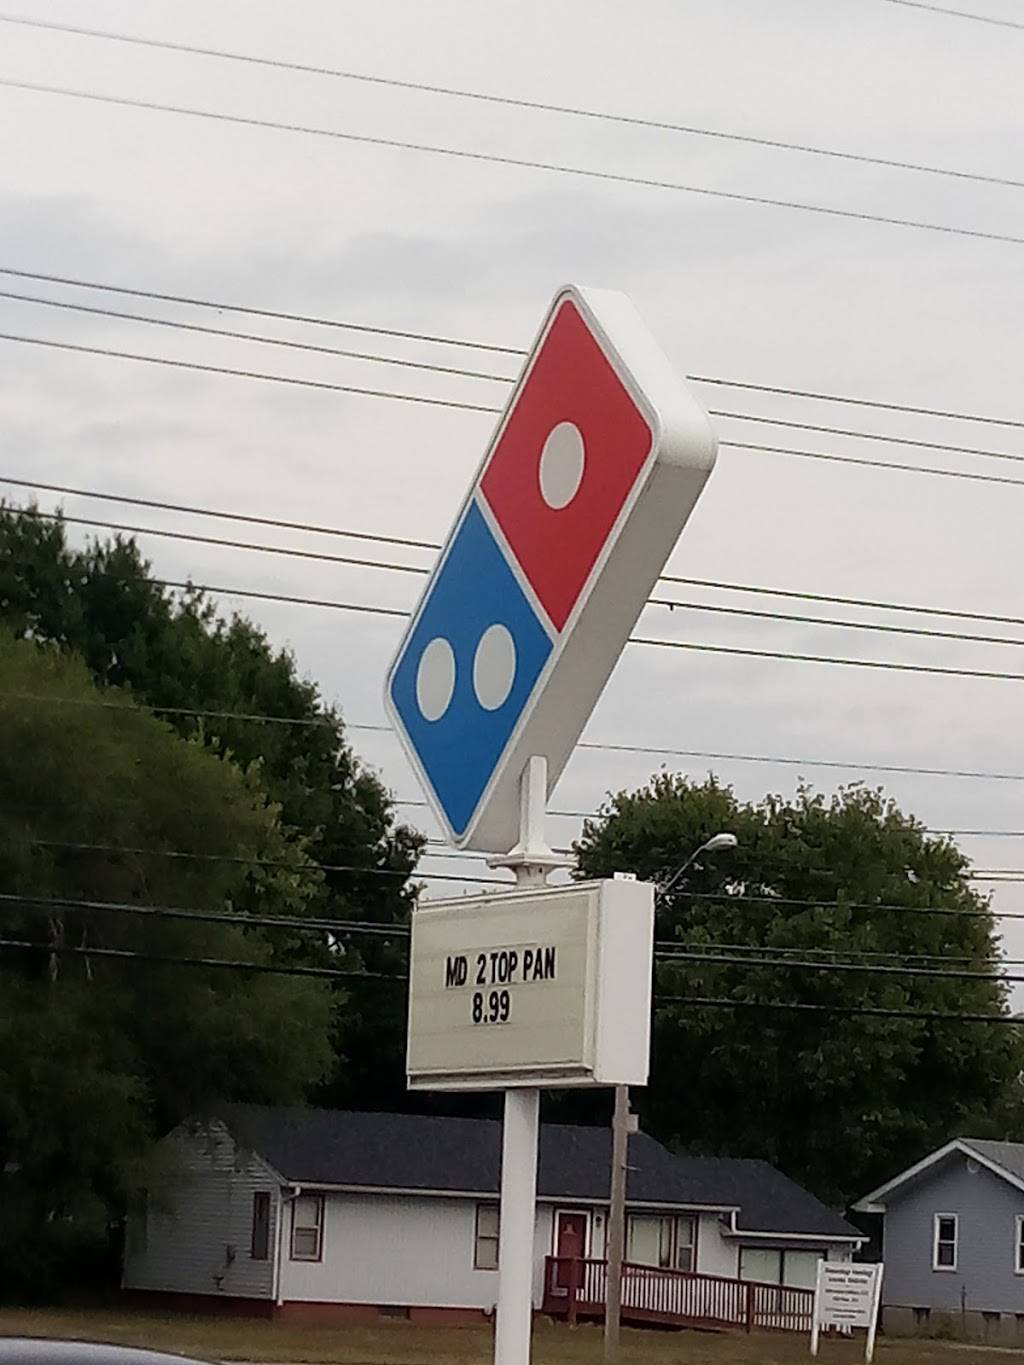 Dominos Pizza | meal delivery | 1302 Camp Jackson Rd # 1, Cahokia, IL 62206, USA | 6183322266 OR +1 618-332-2266